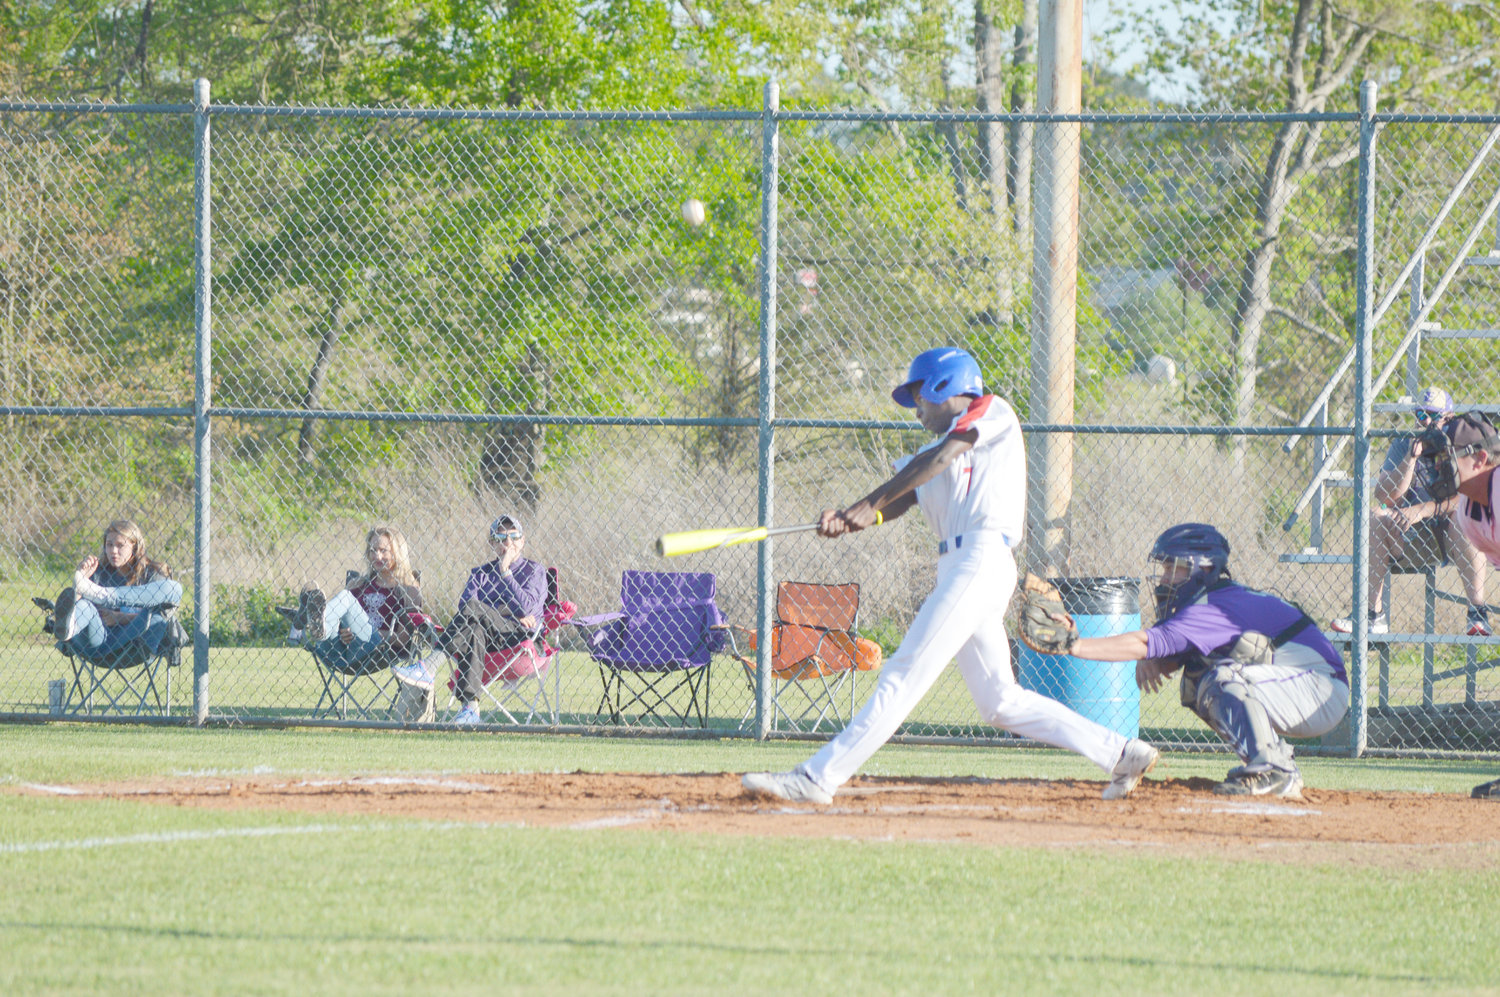 Trey Berry takes a big cut and fouls off a pitch in Friday’s game against Eustace.